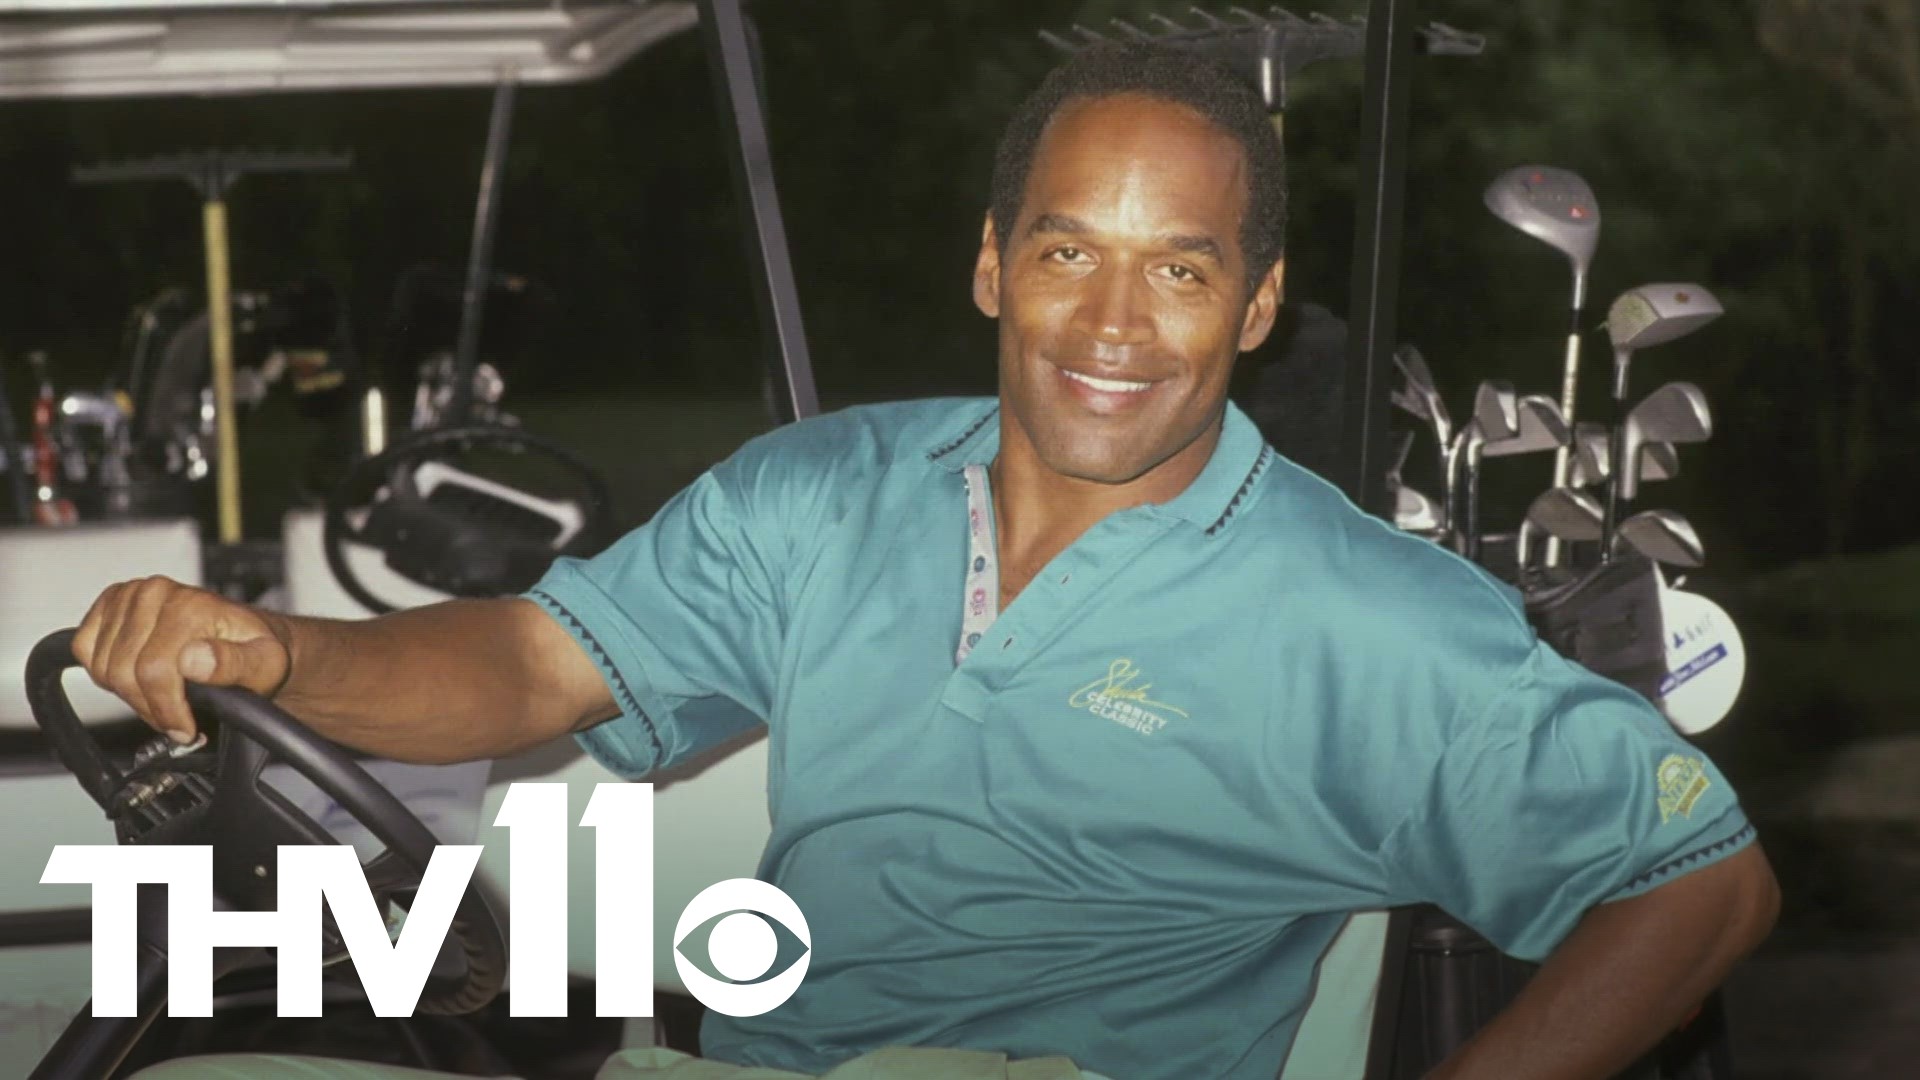 O.J. Simpson, the man who went from football star to advertising pitchman to acquitted murderer, died of cancer at the age of 76.